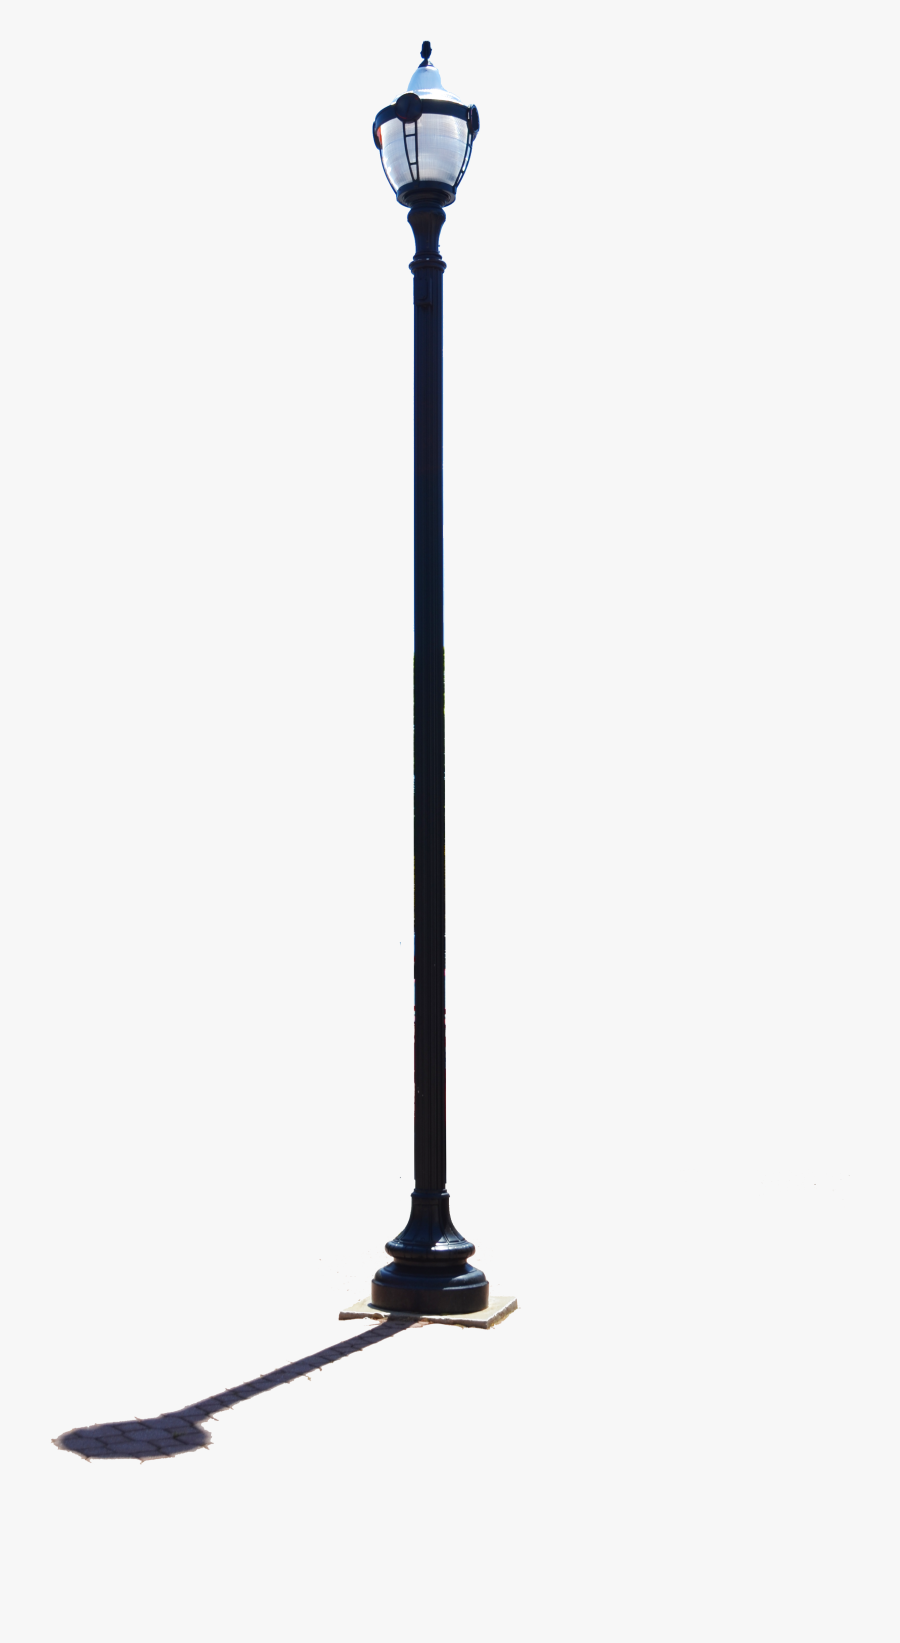 Lamp Post Png Street Light Stock Photo 0140 By Annamae22 - Street Lamp Post Png, Transparent Clipart